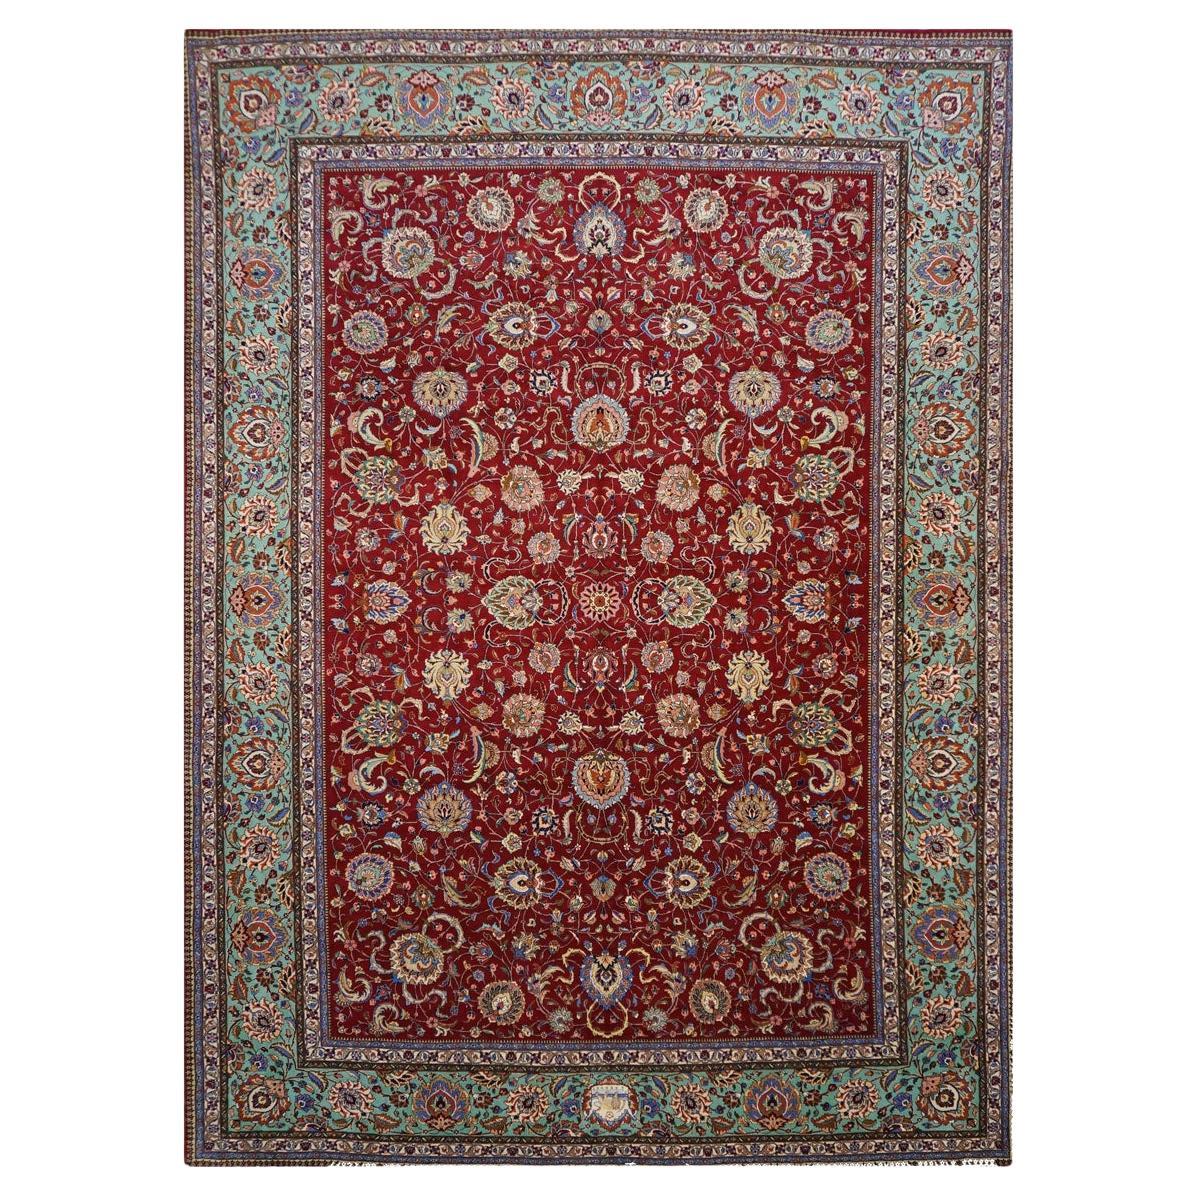 Antique 1940s Persian Tabriz Pahlavi 11x16 Red, Teal, & Ivory Handmade Area Rug For Sale